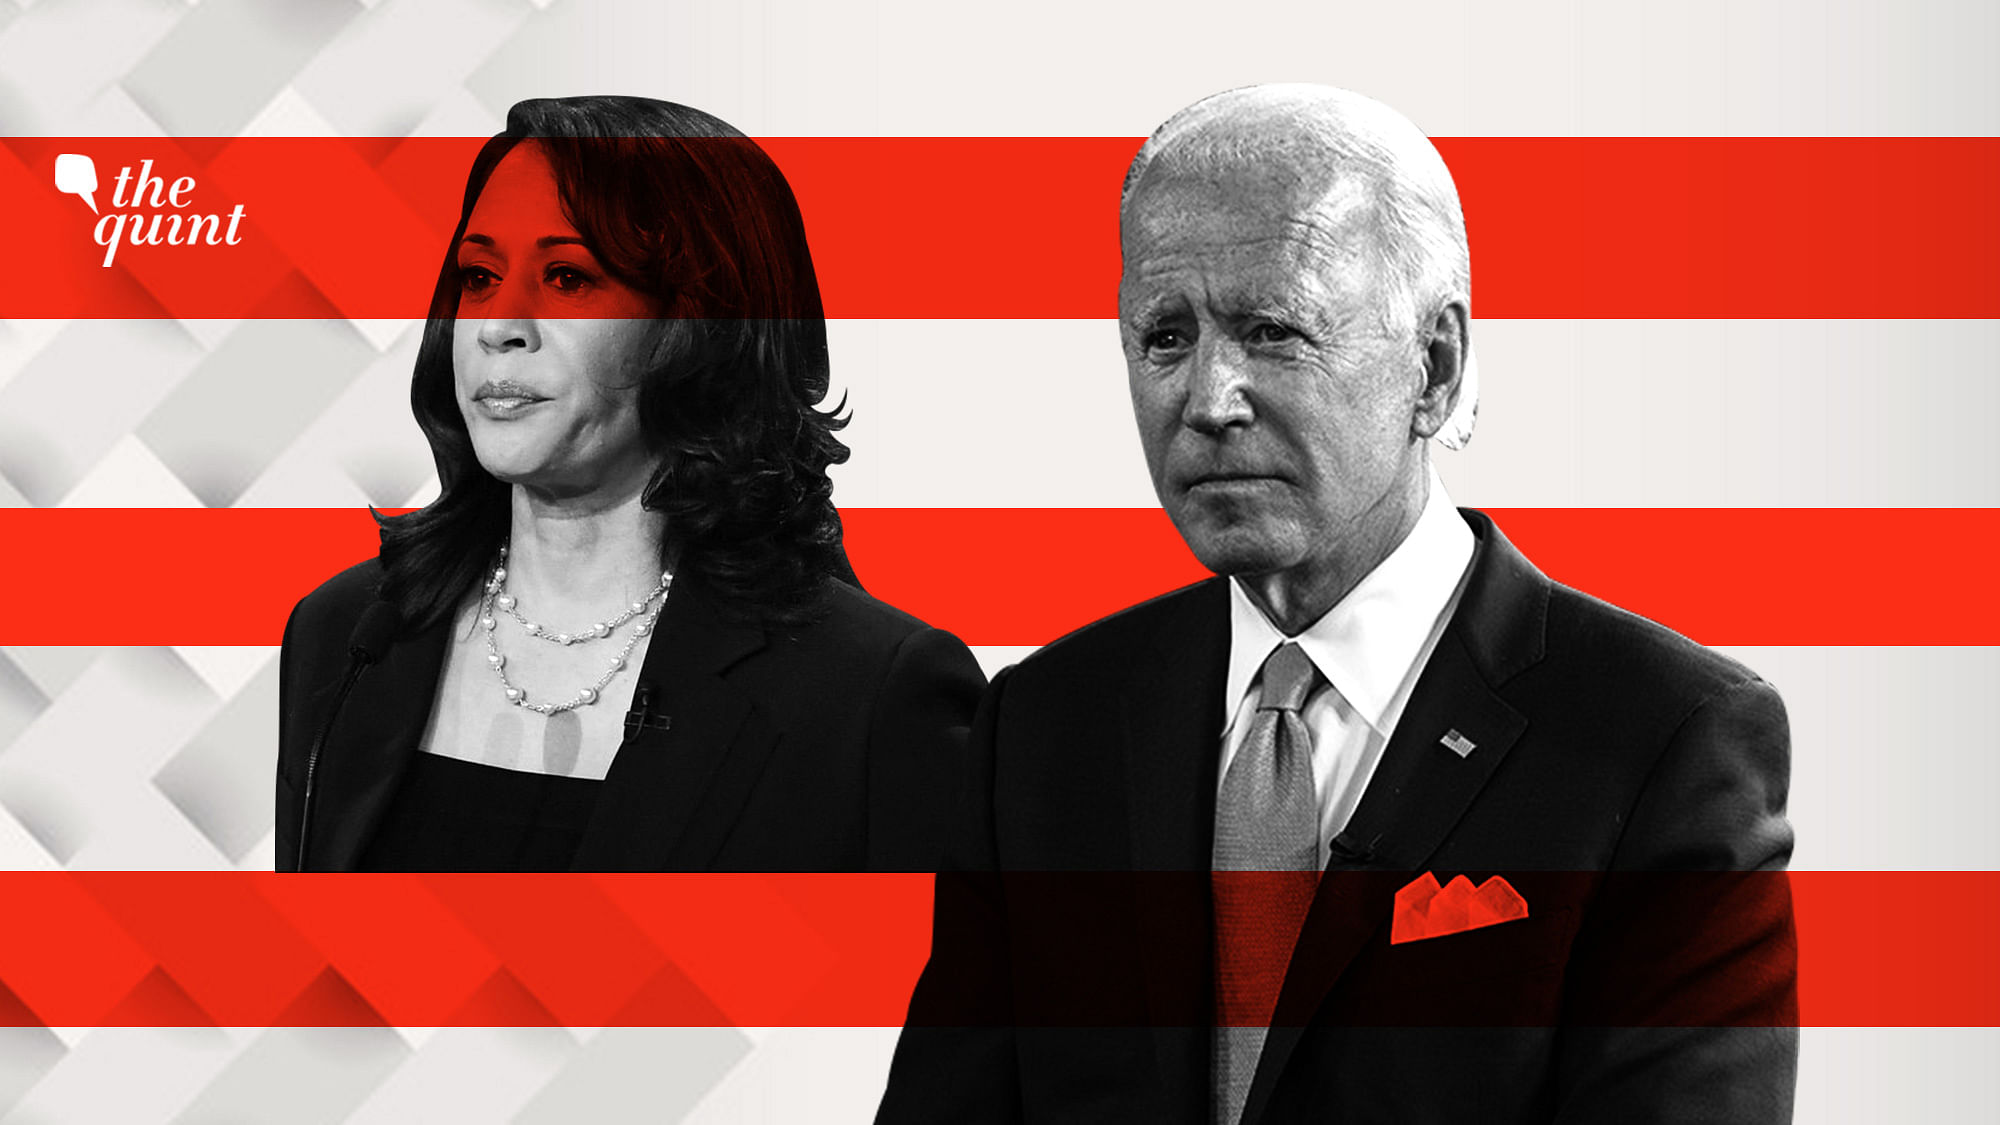 Biden has placed immigration as central to the American competitive advantage, charged in spirit of entrepreneurship and innovation.